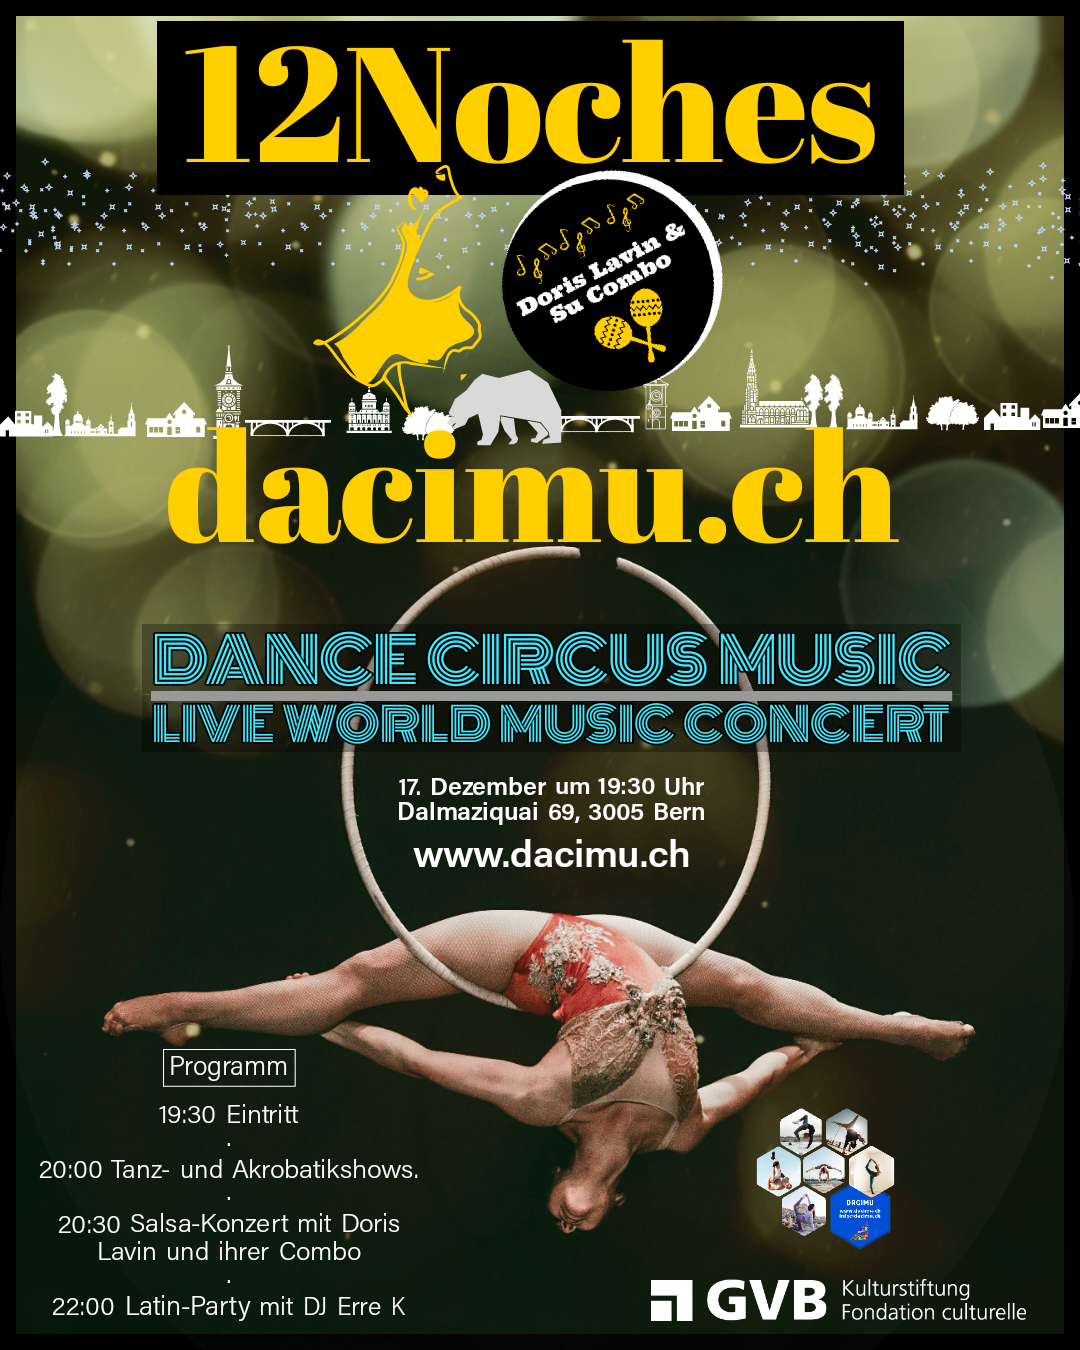 12noches Events - Dance Circus & Music